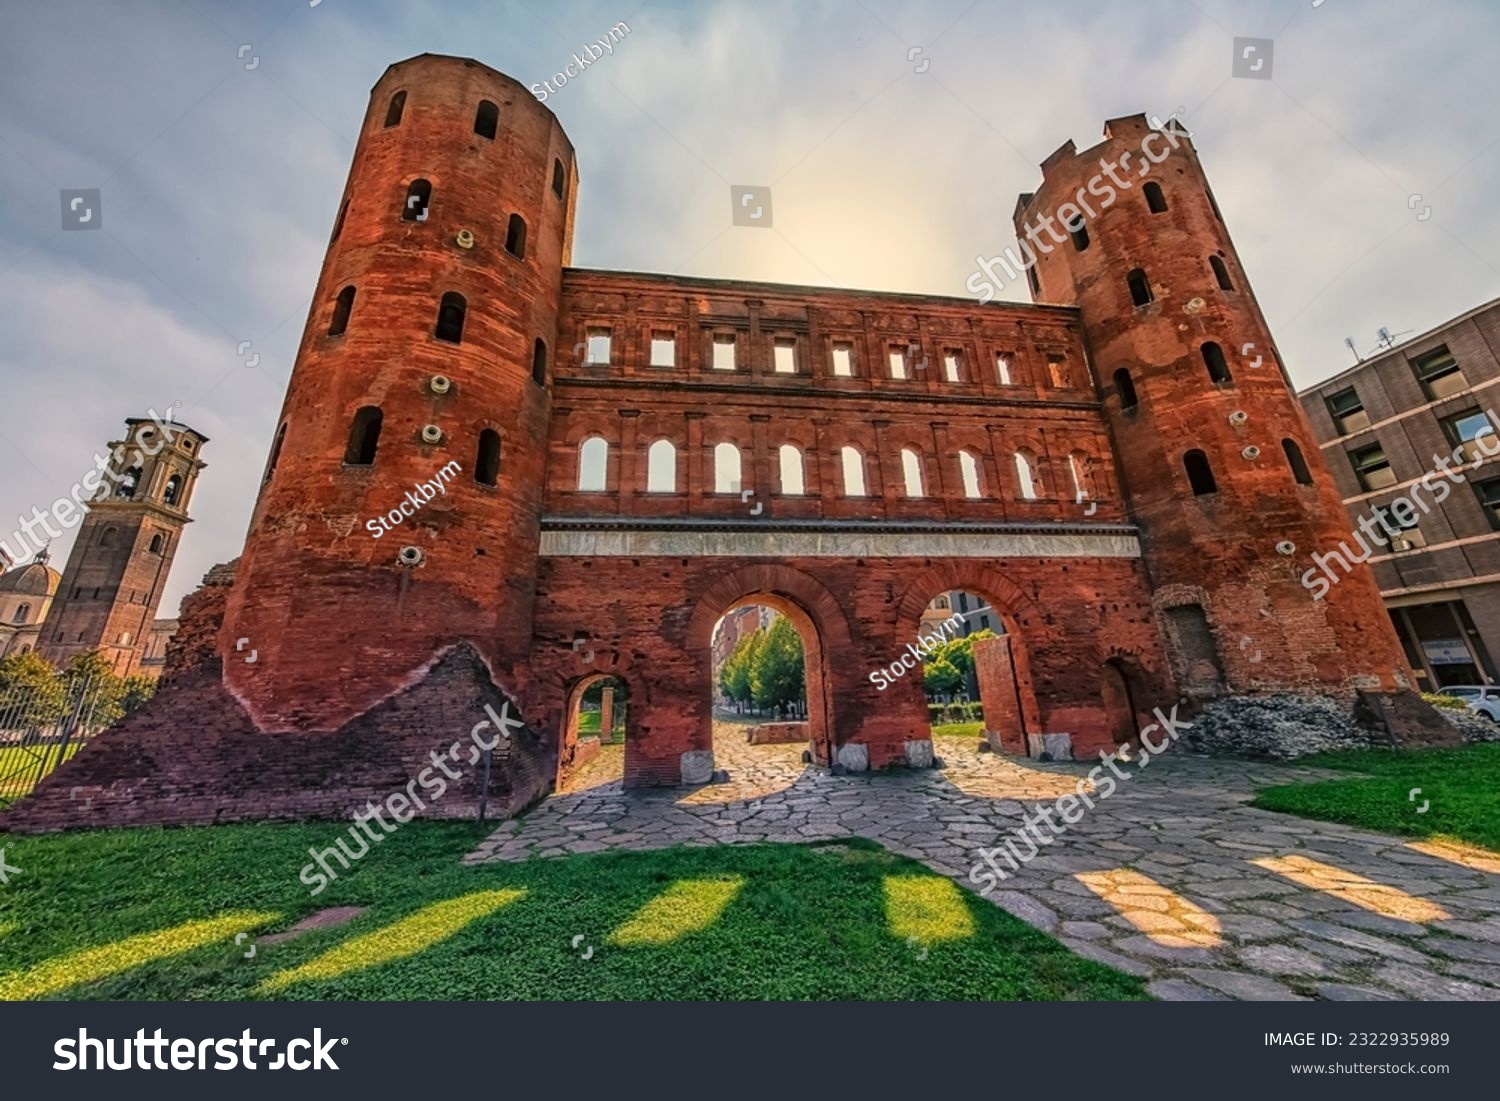 The Palatine Towers, an ancient roman city gate in the Old Town of Turin, Italy #2322935989